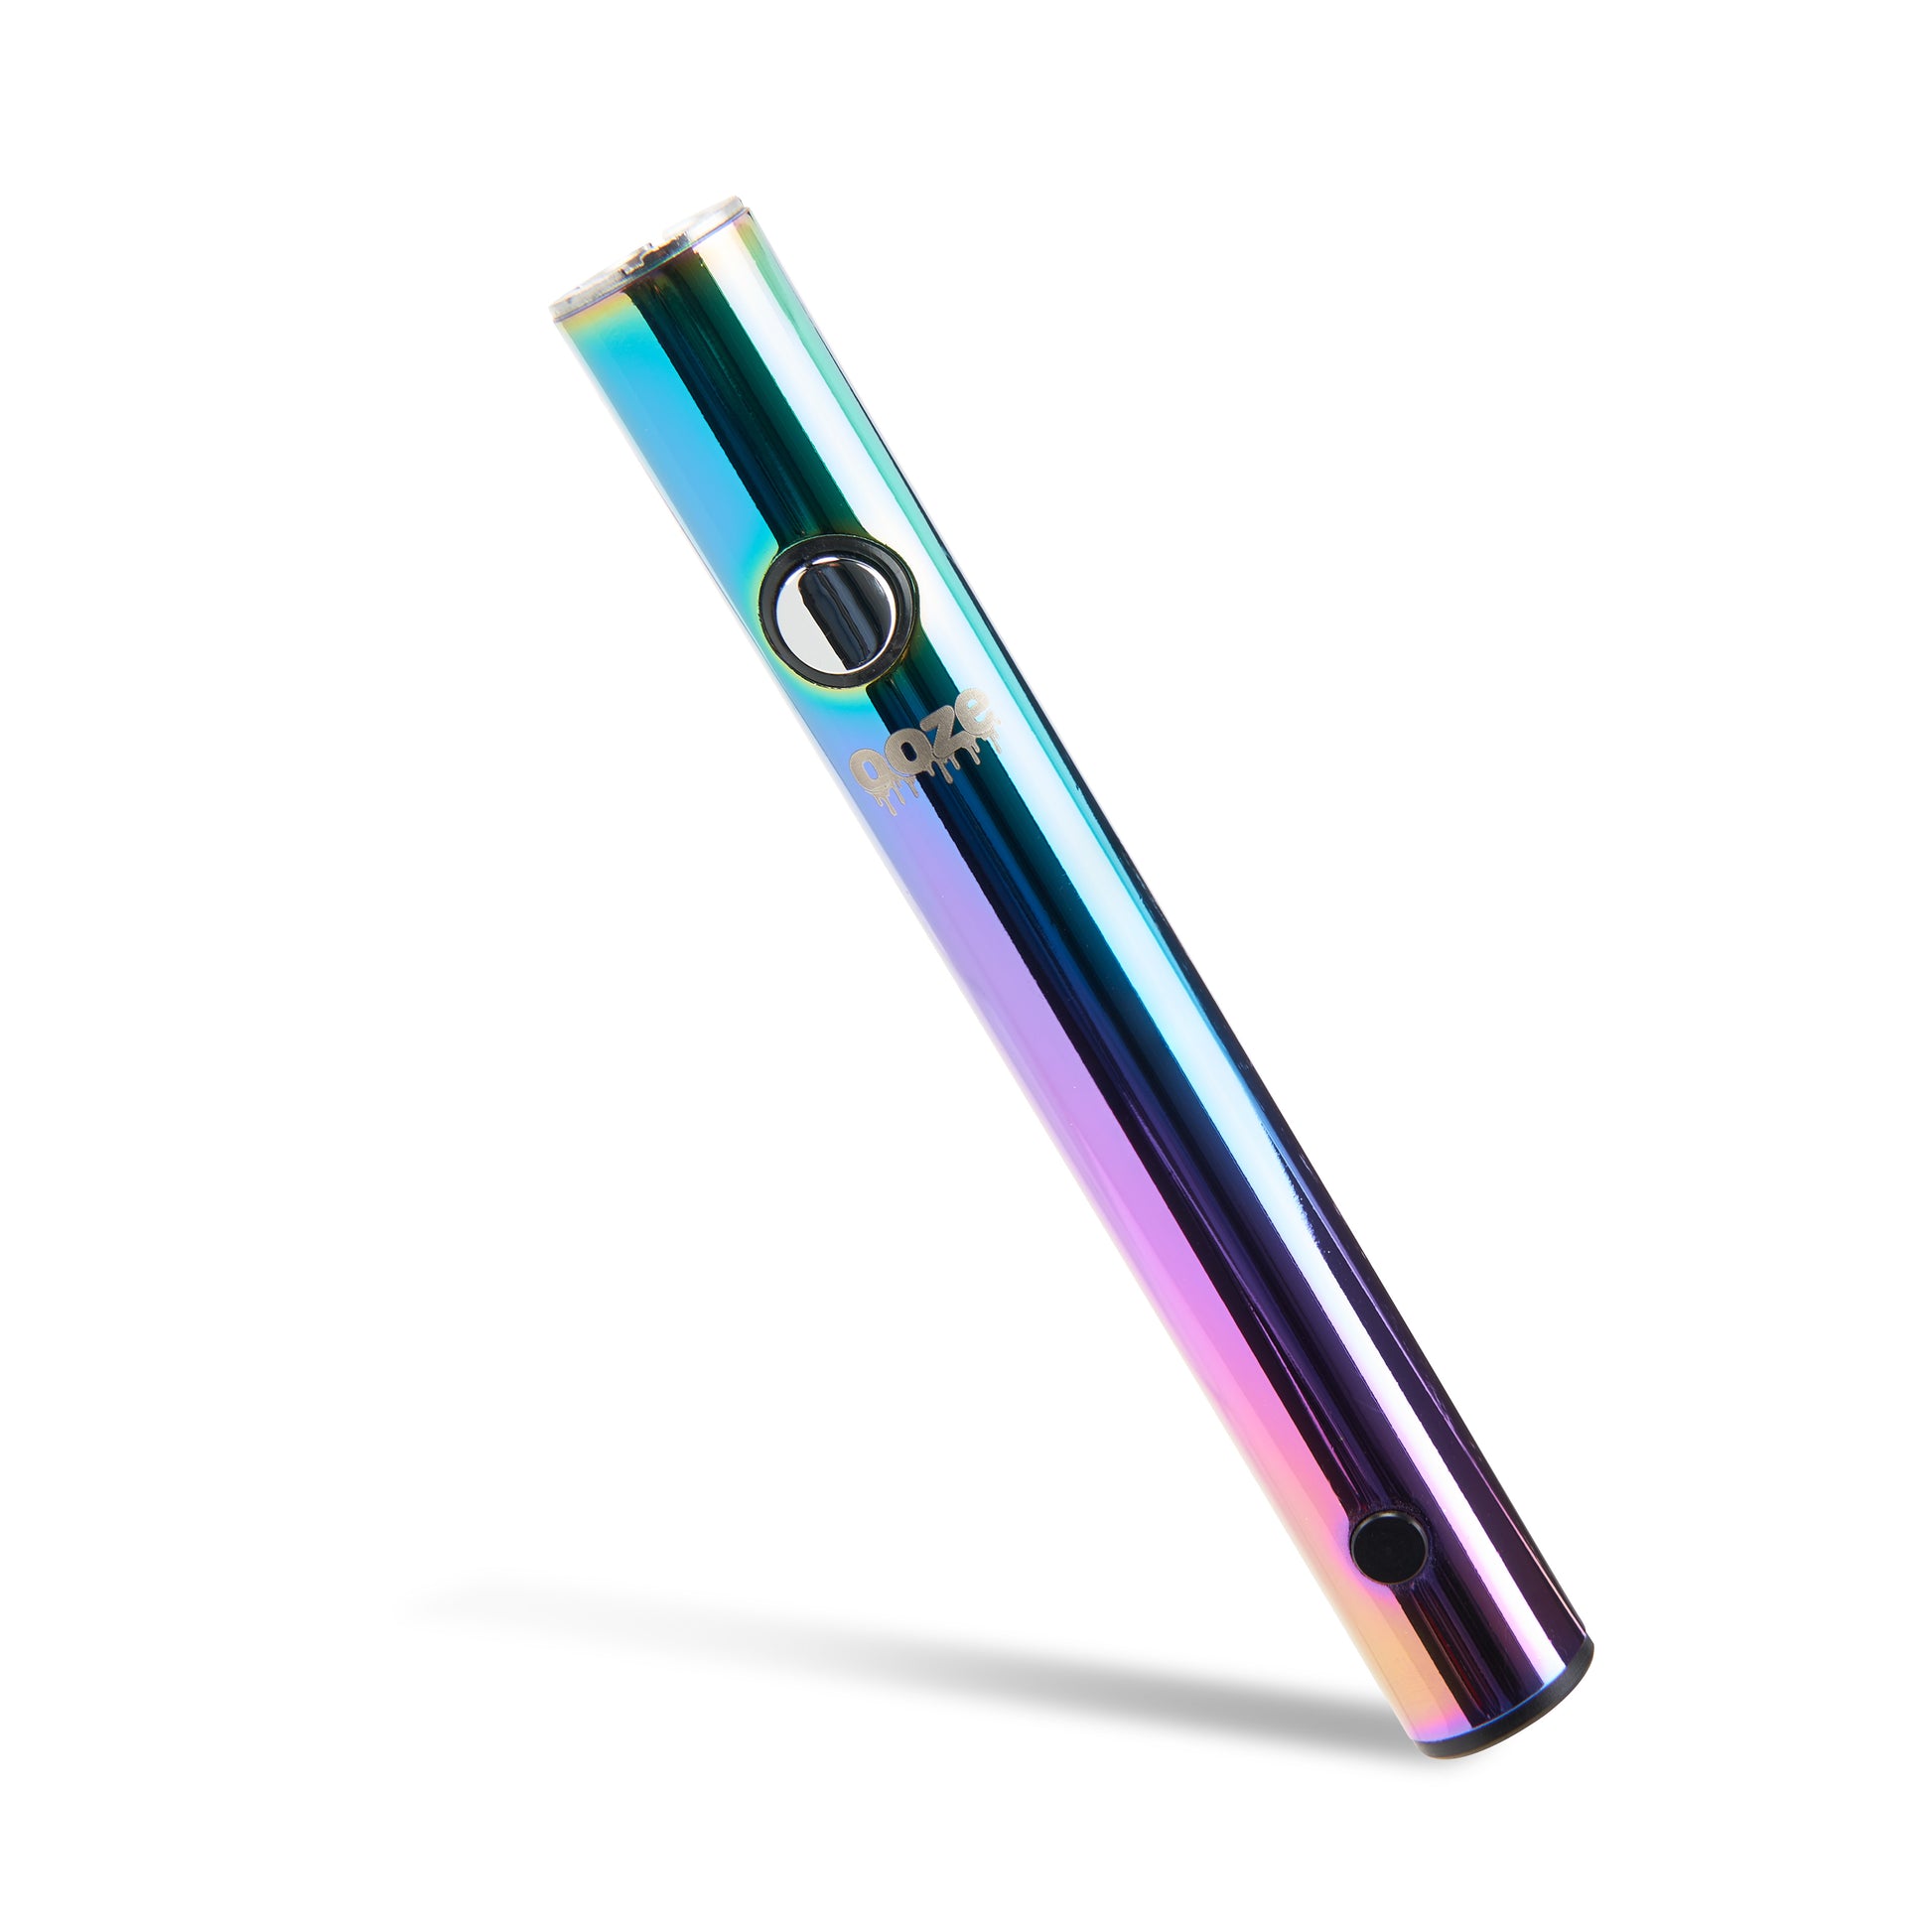 The rainbow Ooze WInk pen is leaning at a 45 degree angle